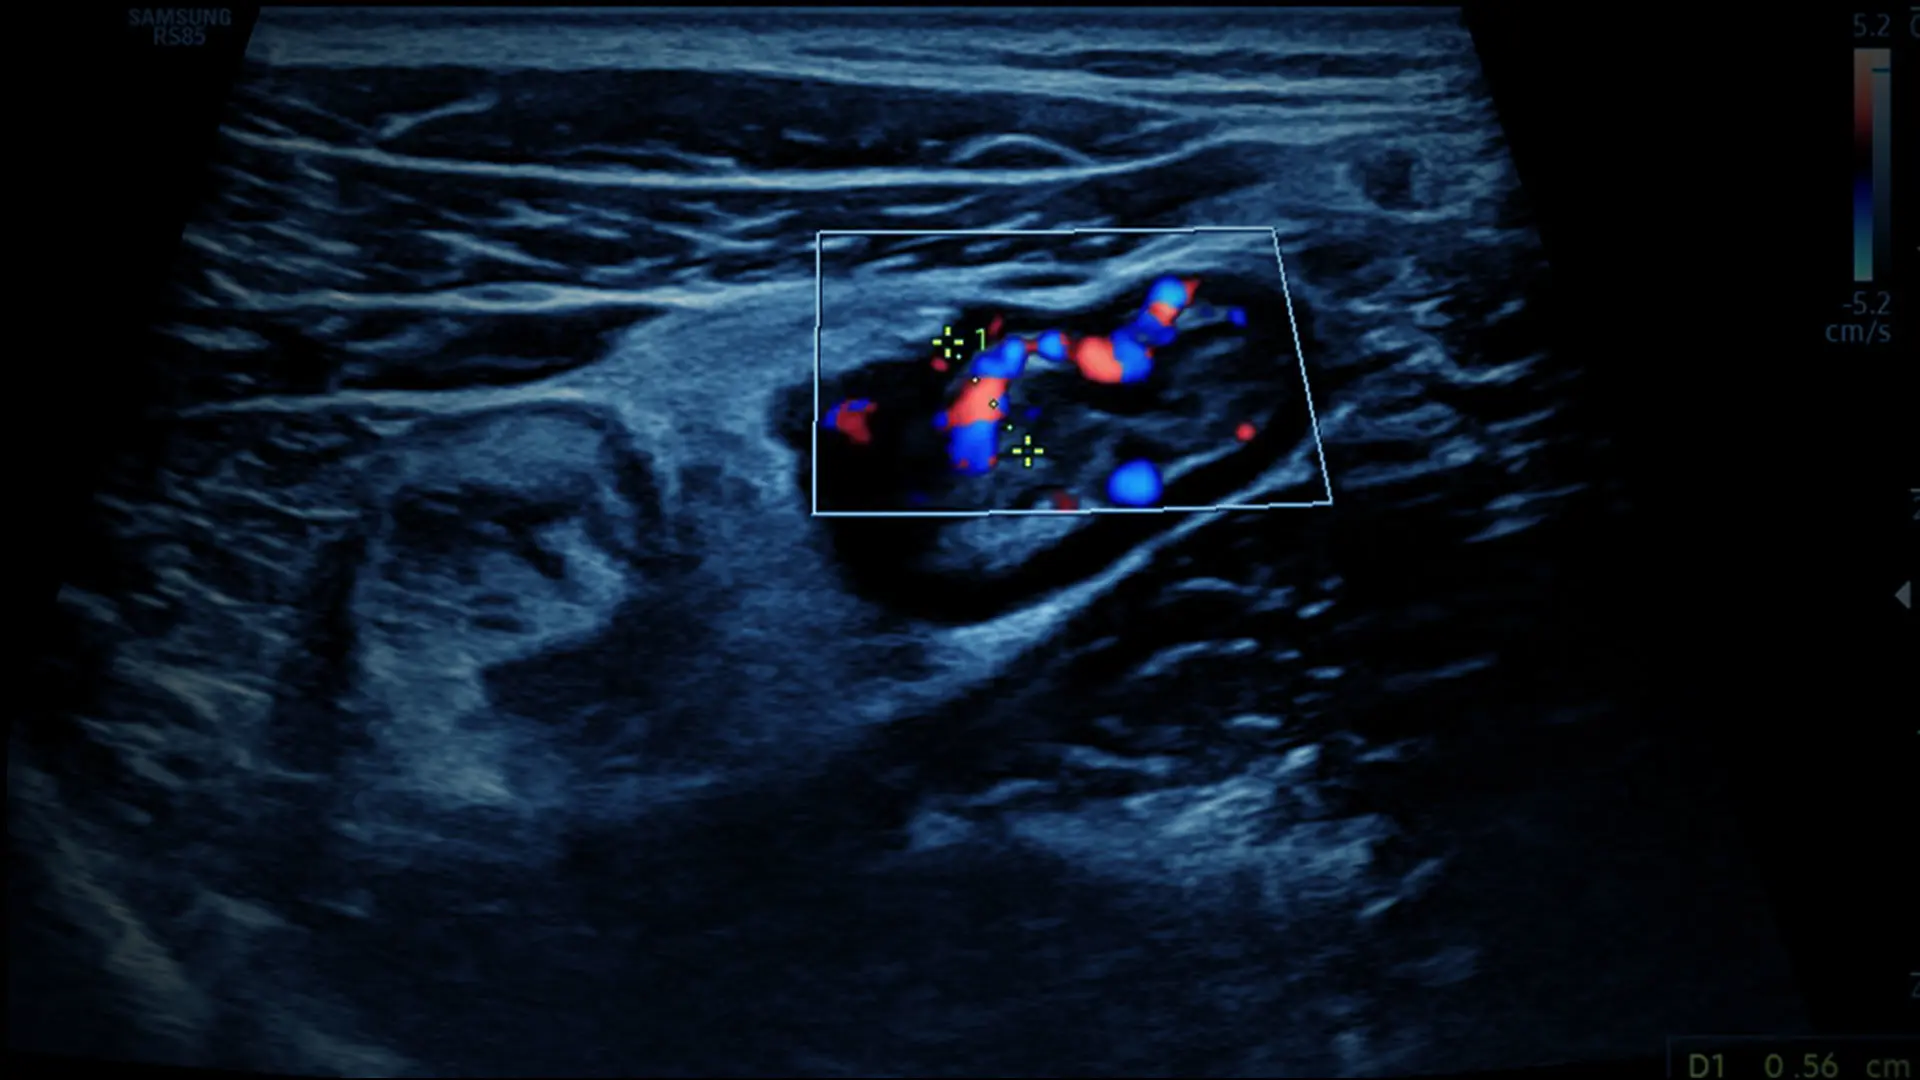 Bringing Ultrasound to the Bedside to Rapidly Diagnose and Treat IBD